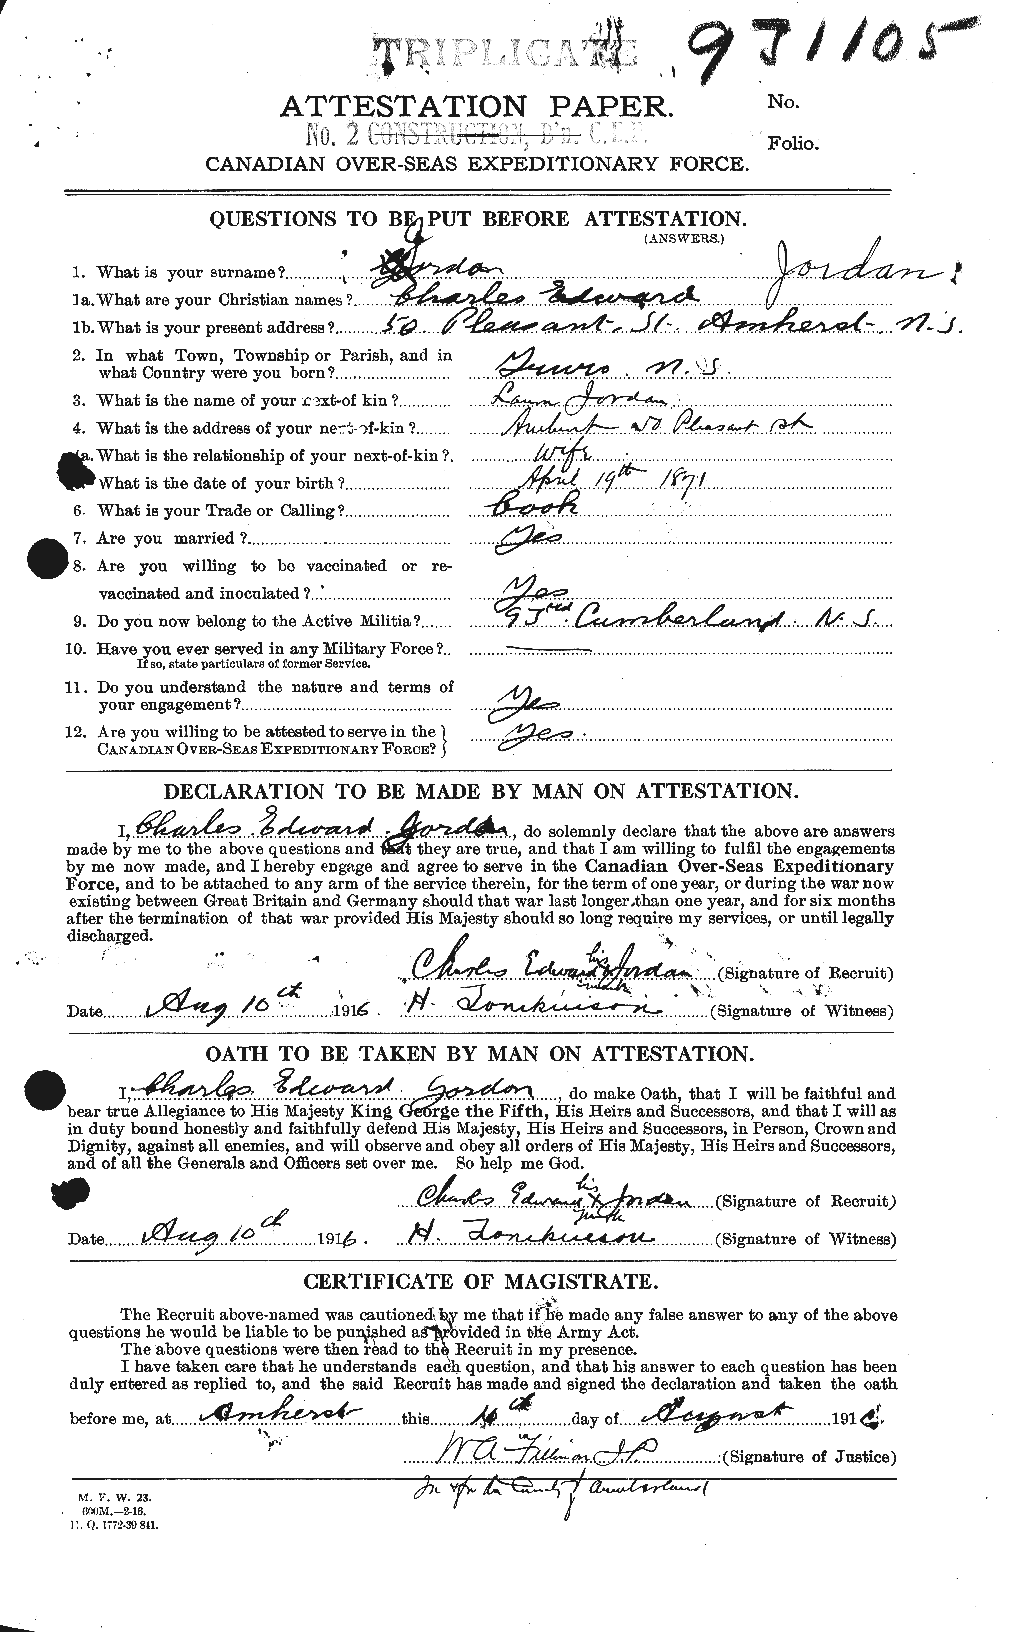 Personnel Records of the First World War - CEF 424265a